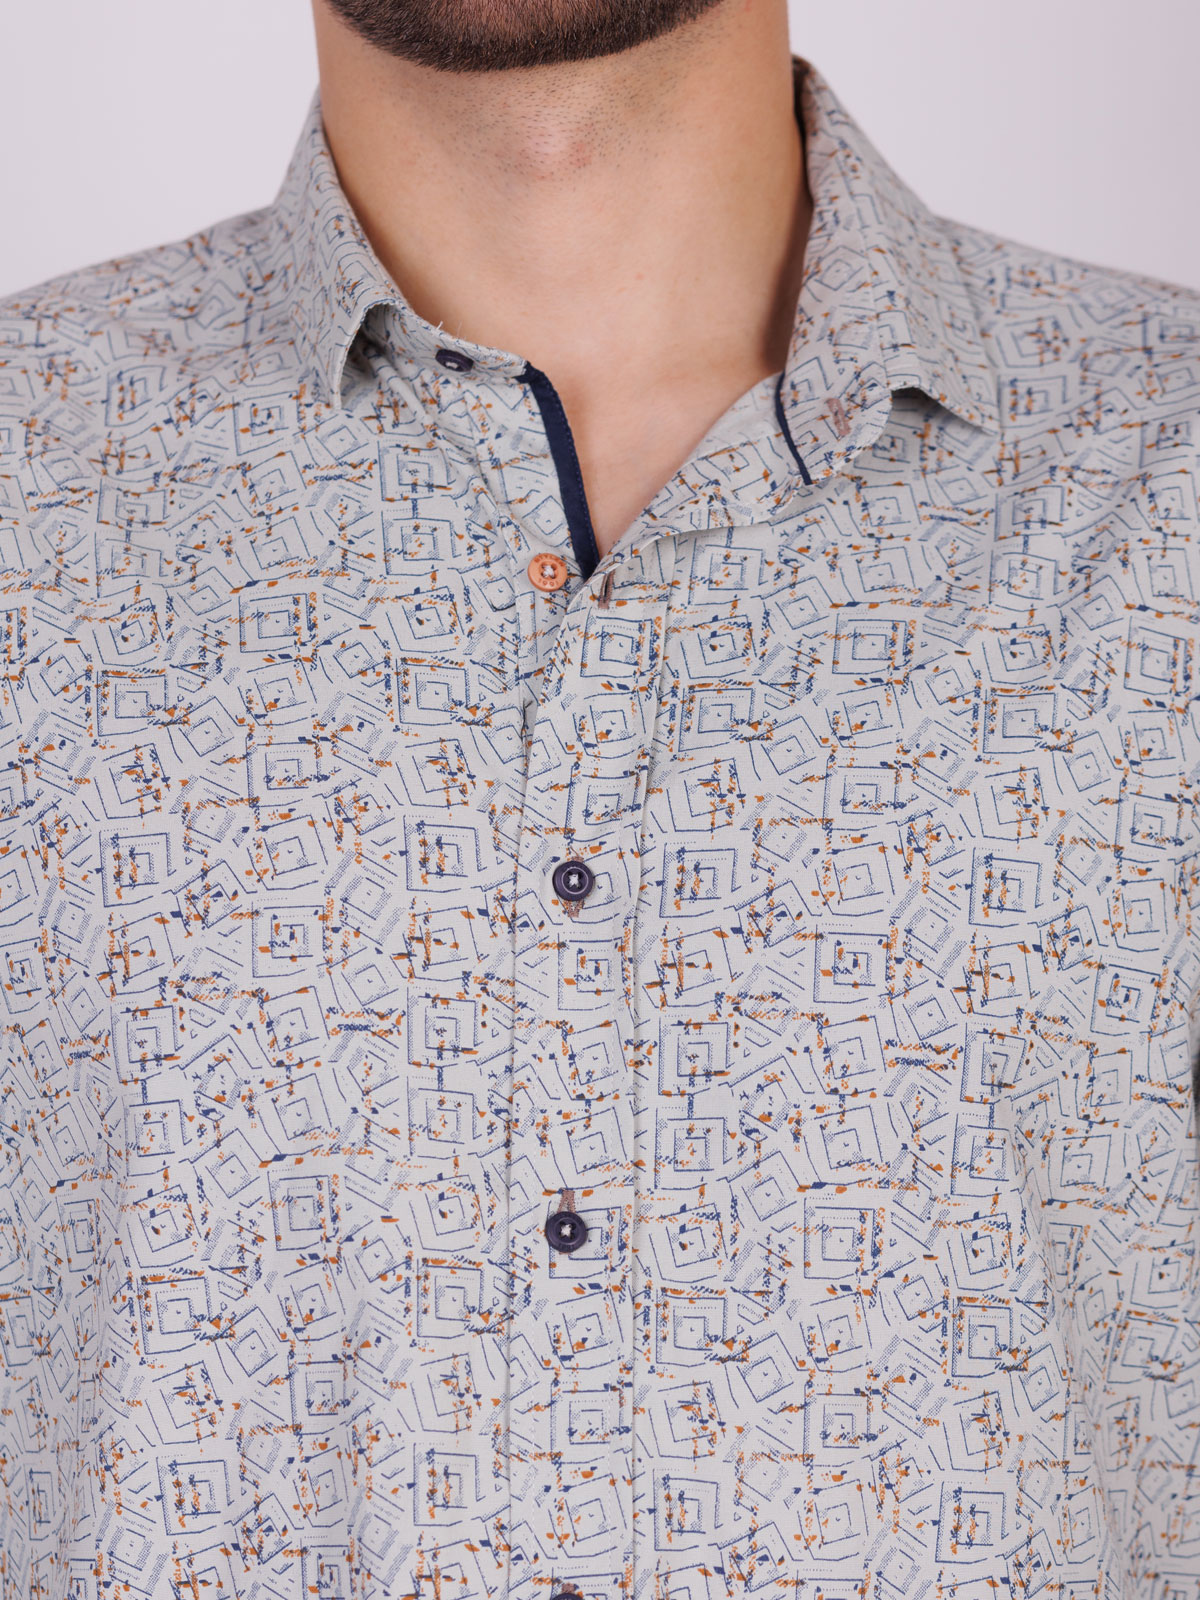 Mens shirt with a spectacular design - 21557 € 44.43 img3